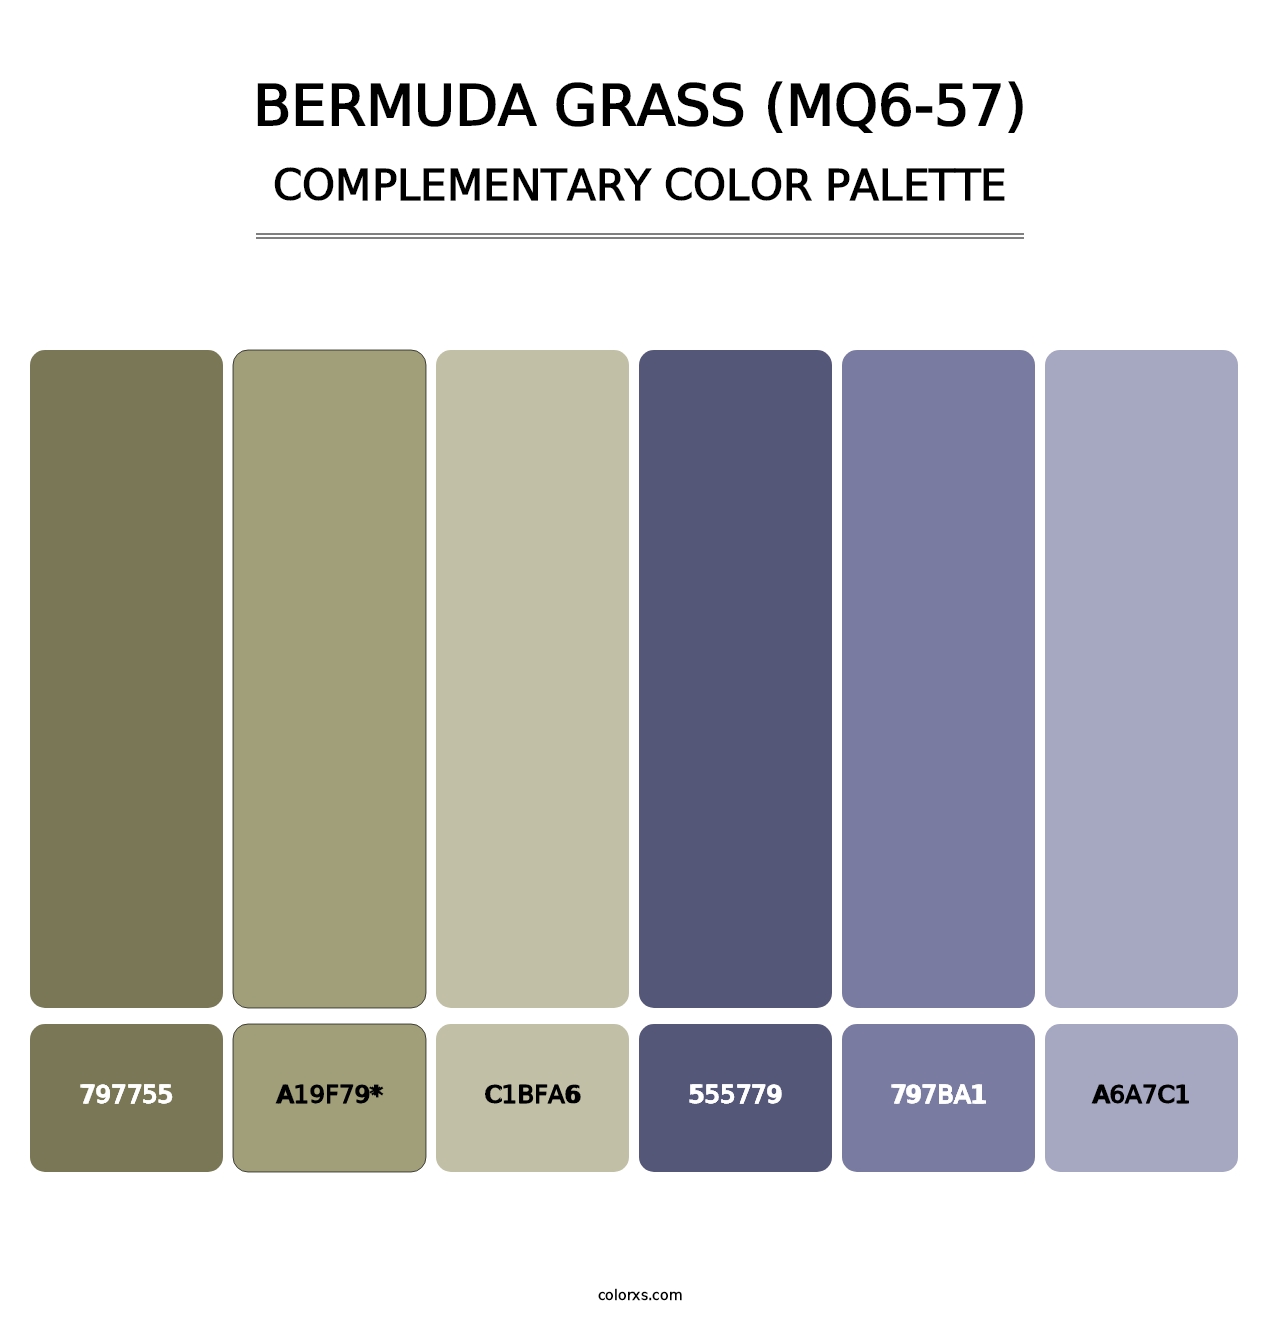 Bermuda Grass (MQ6-57) - Complementary Color Palette